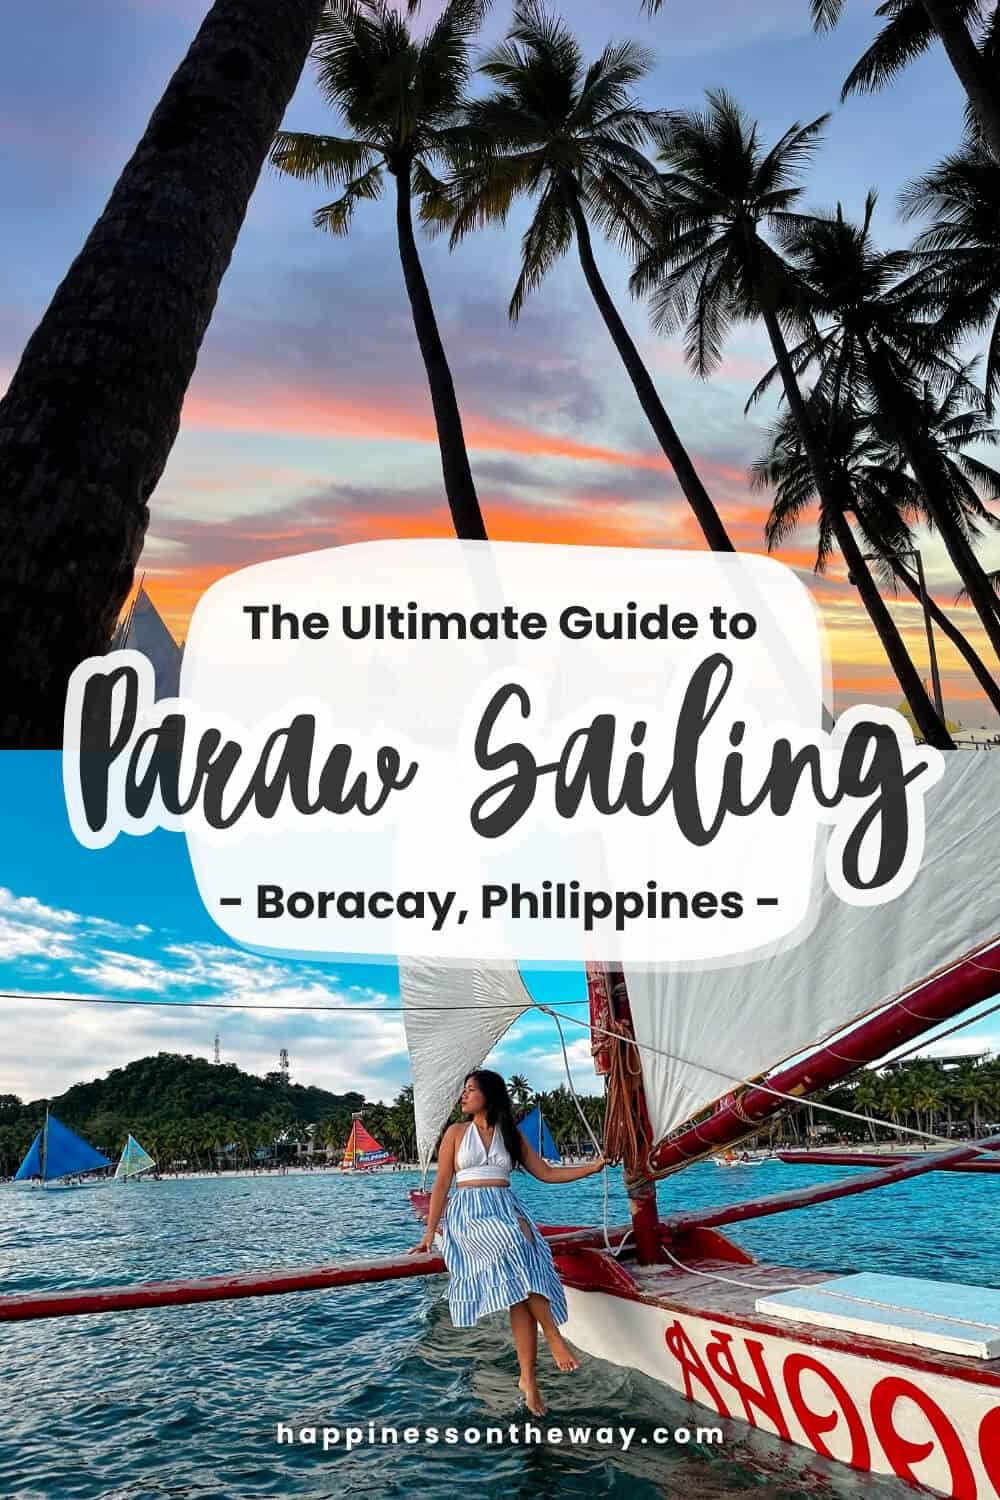 paraw sailing - one of the best activities in Boracay, Philippines